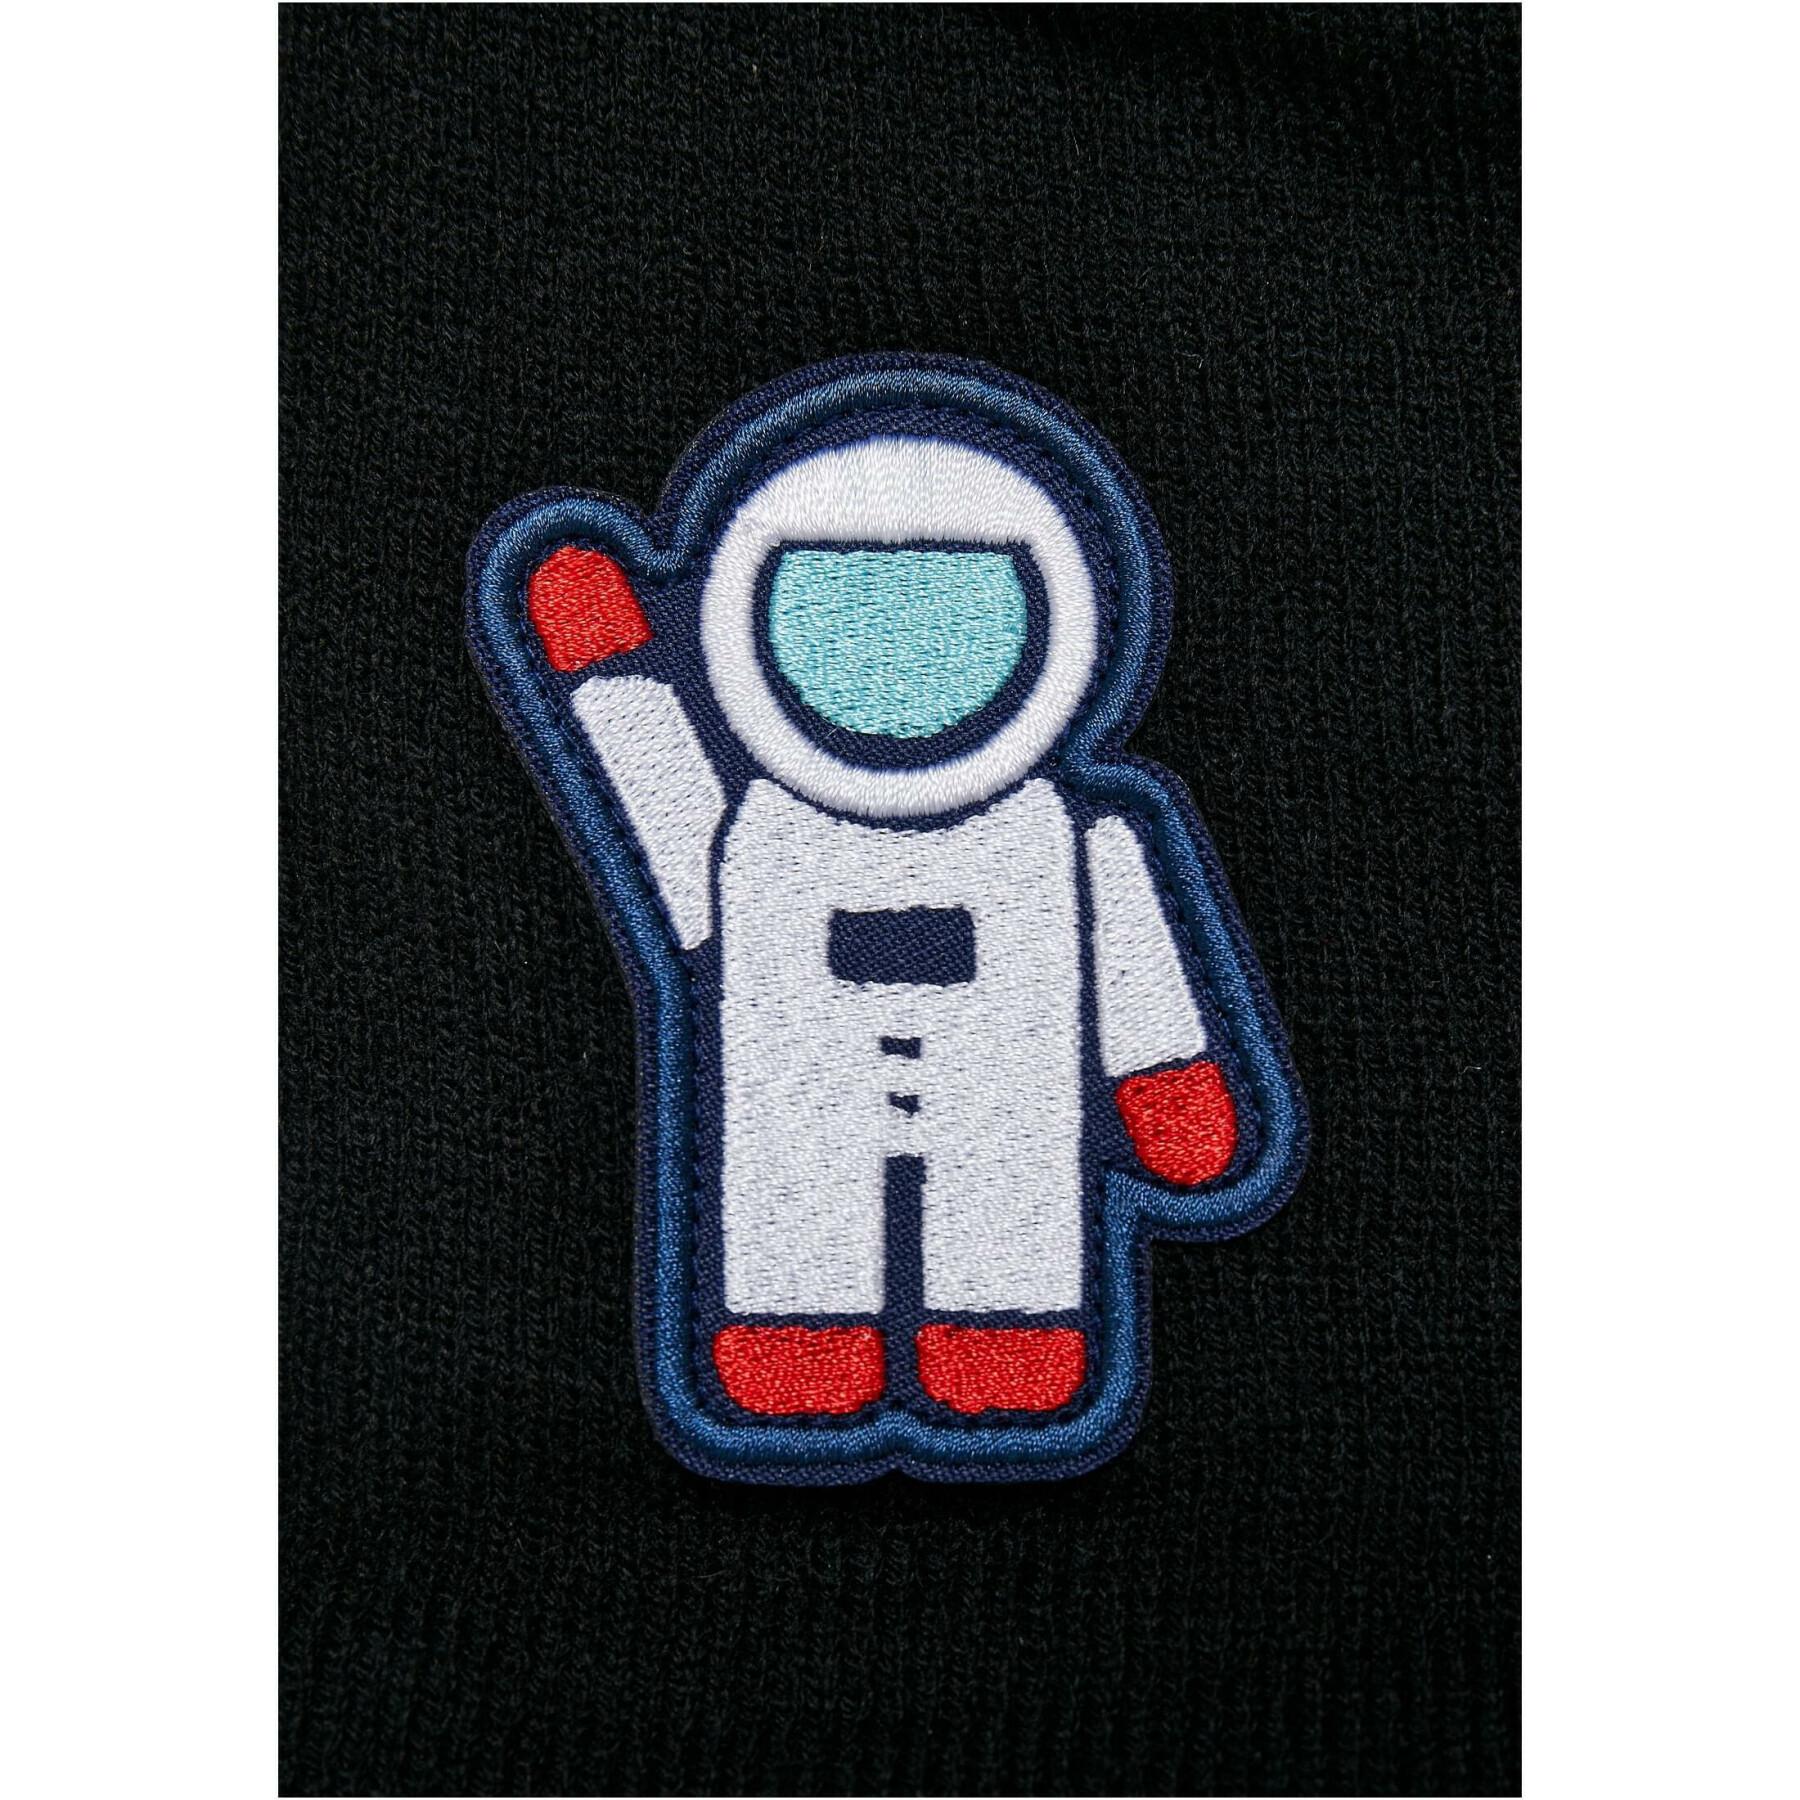 Embroidered hat Mister Tee Nasa